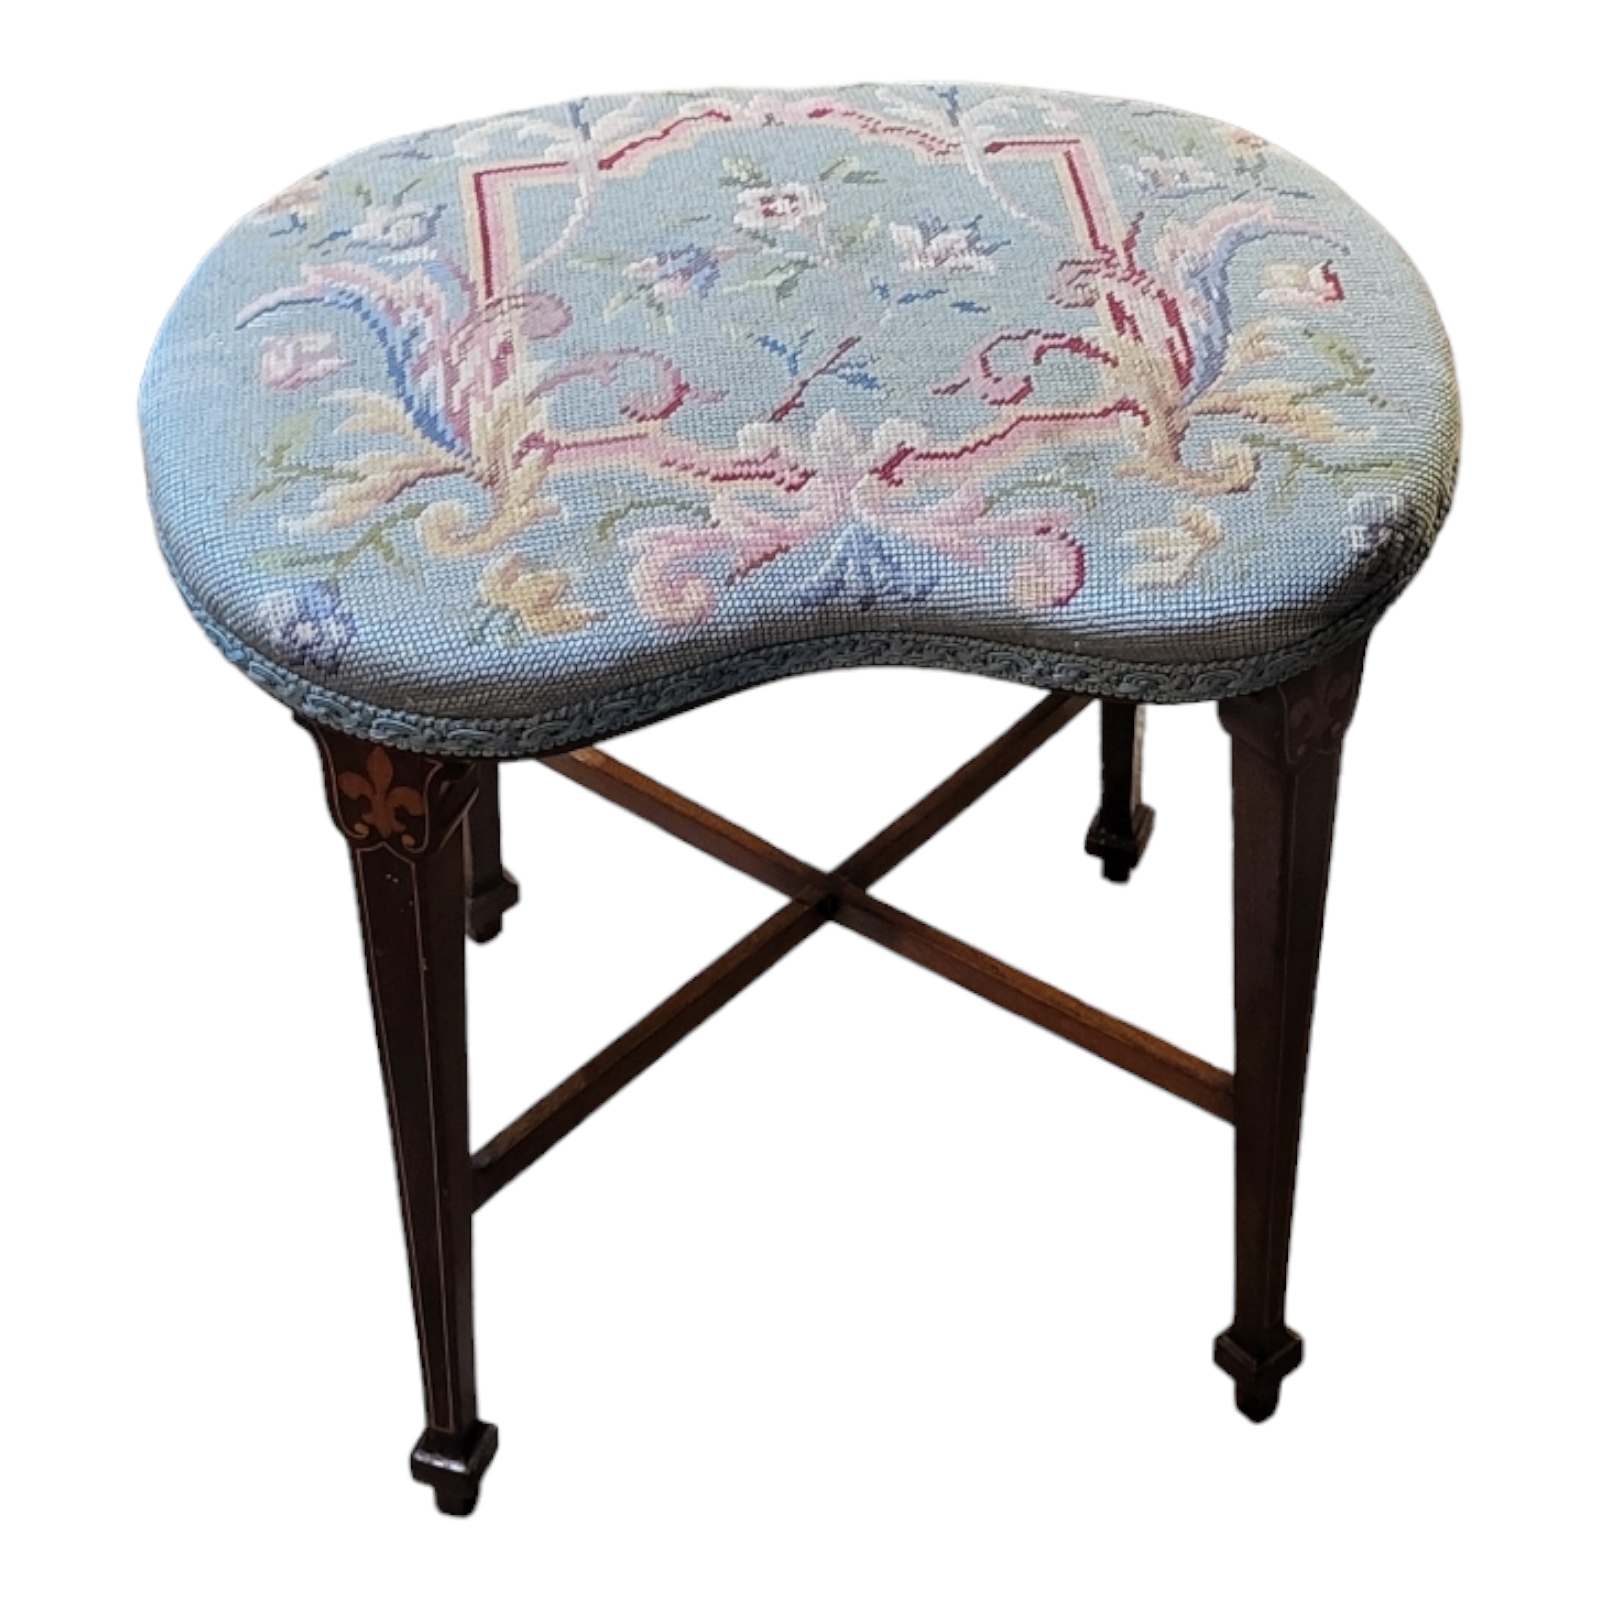 AN EDWARDIAN SHERATON REVIVAL INLAID MAHOGANY STOOL Raised on tapering legs and x shaped supports, - Image 2 of 3